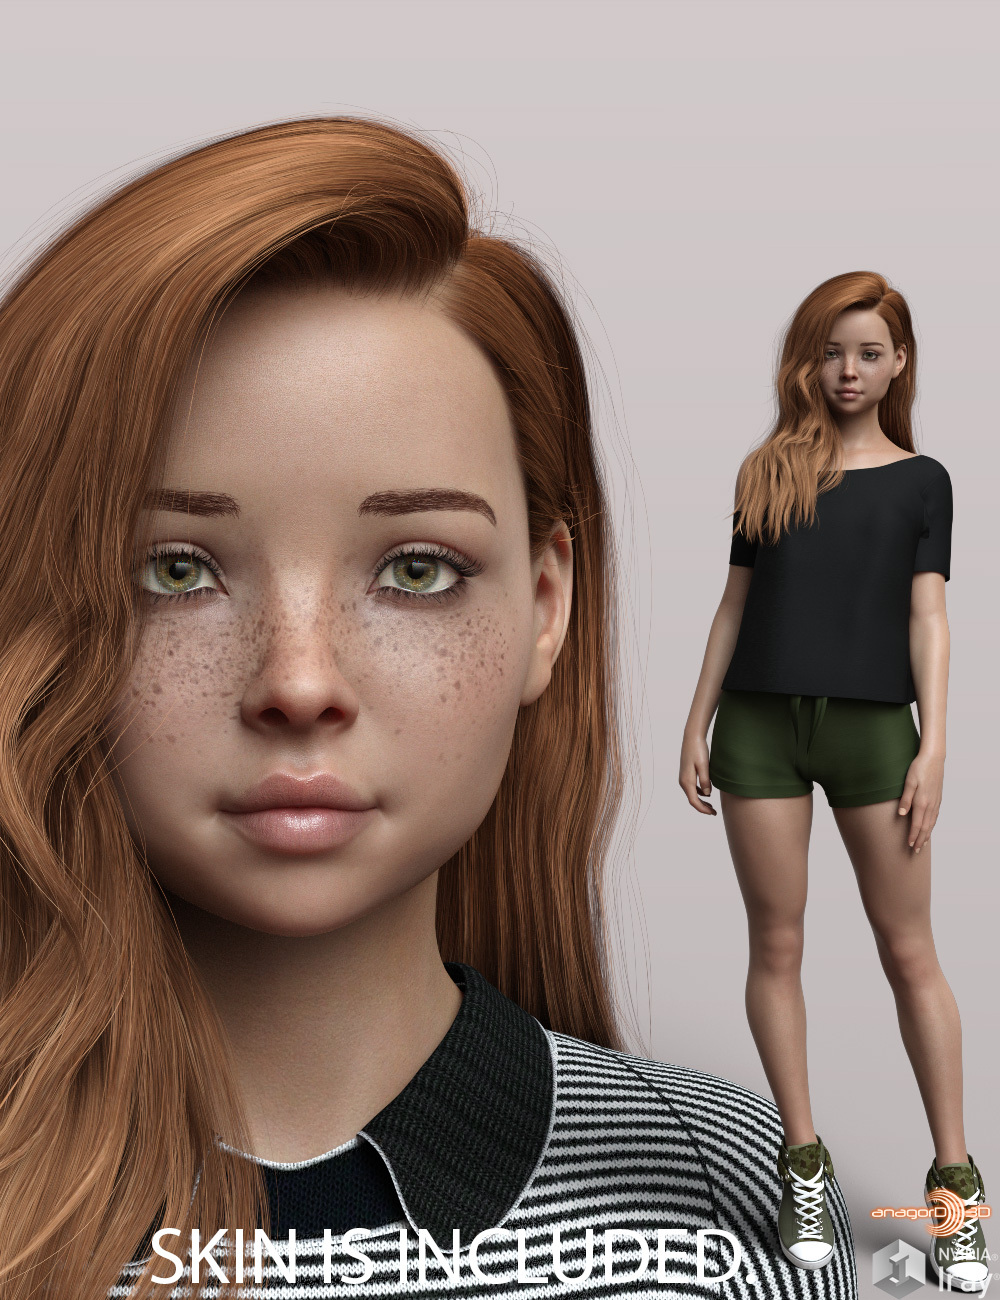 Anagord Teens G8F Vol 11 by: Anagord, 3D Models by Daz 3D